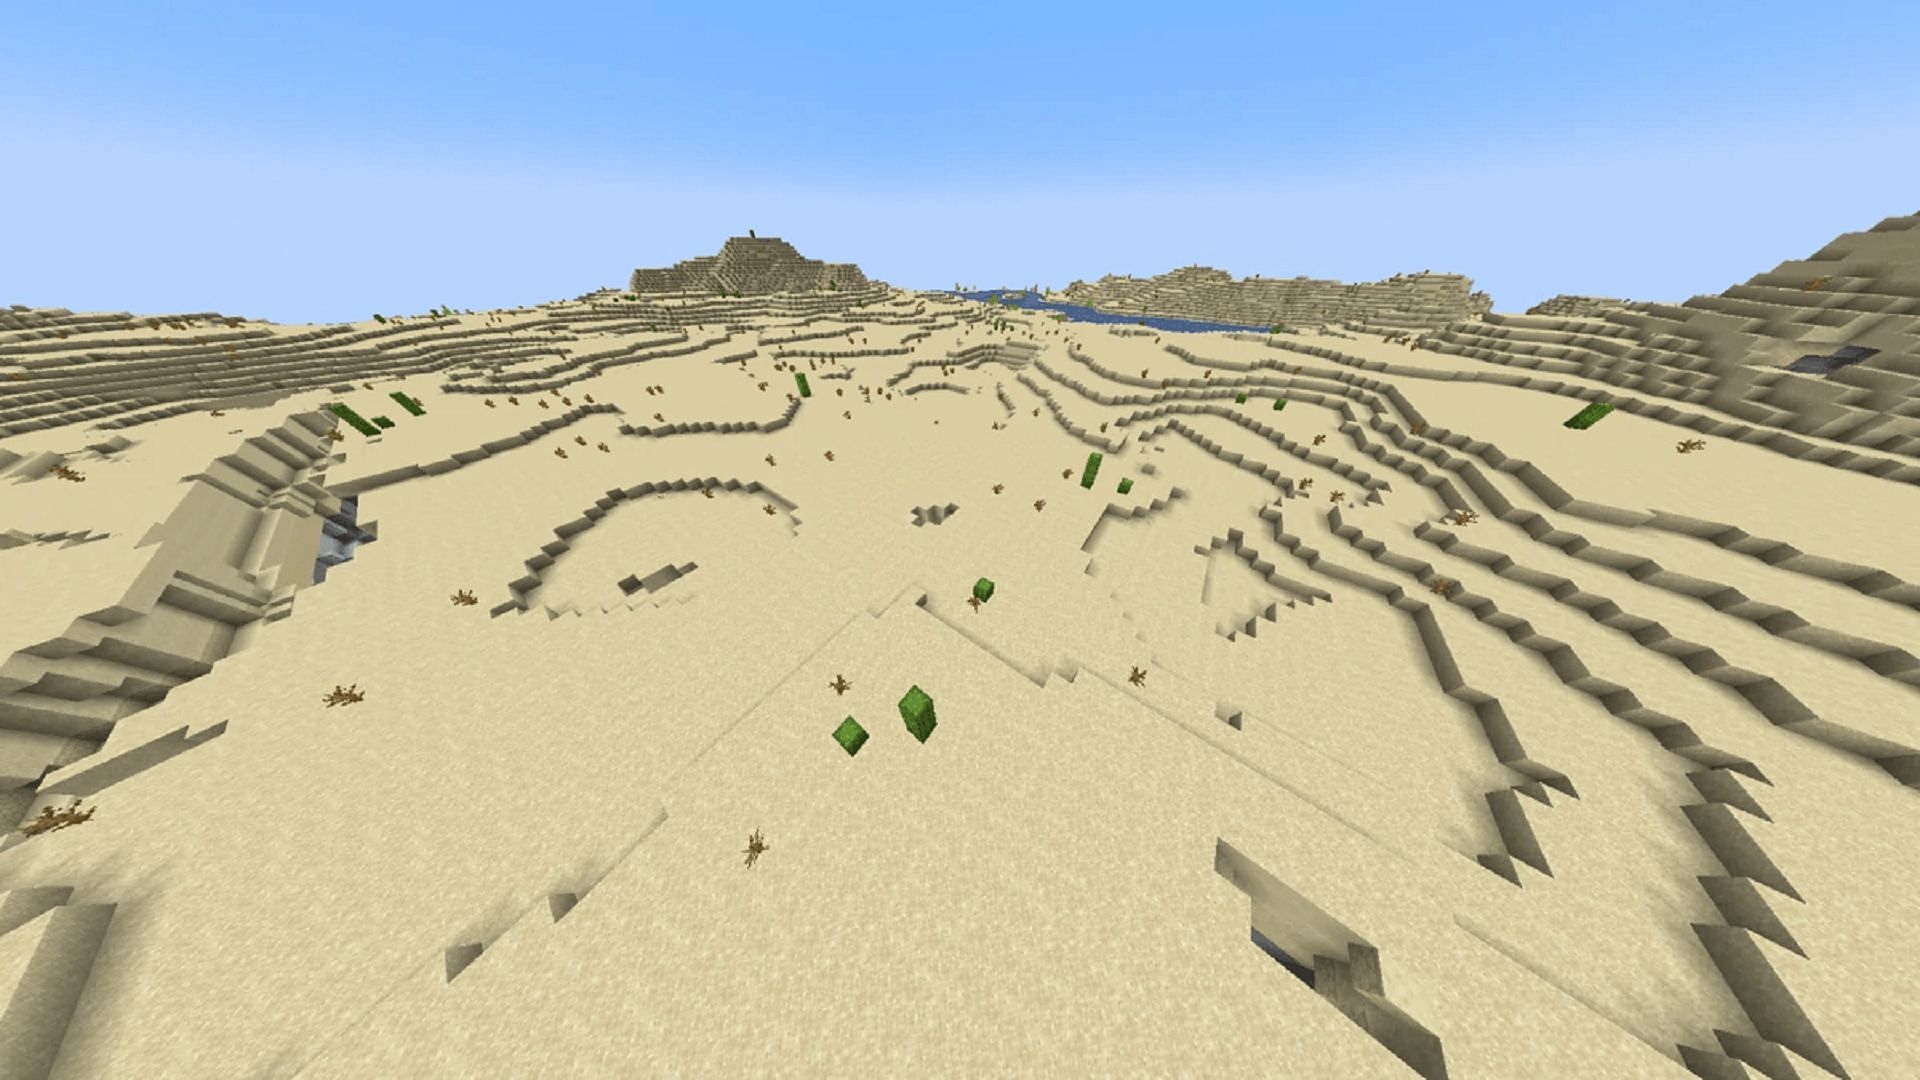 A desert rife with sand blocks, whose low durability allows for relatively quick collection (Image via Minecraft Wiki)